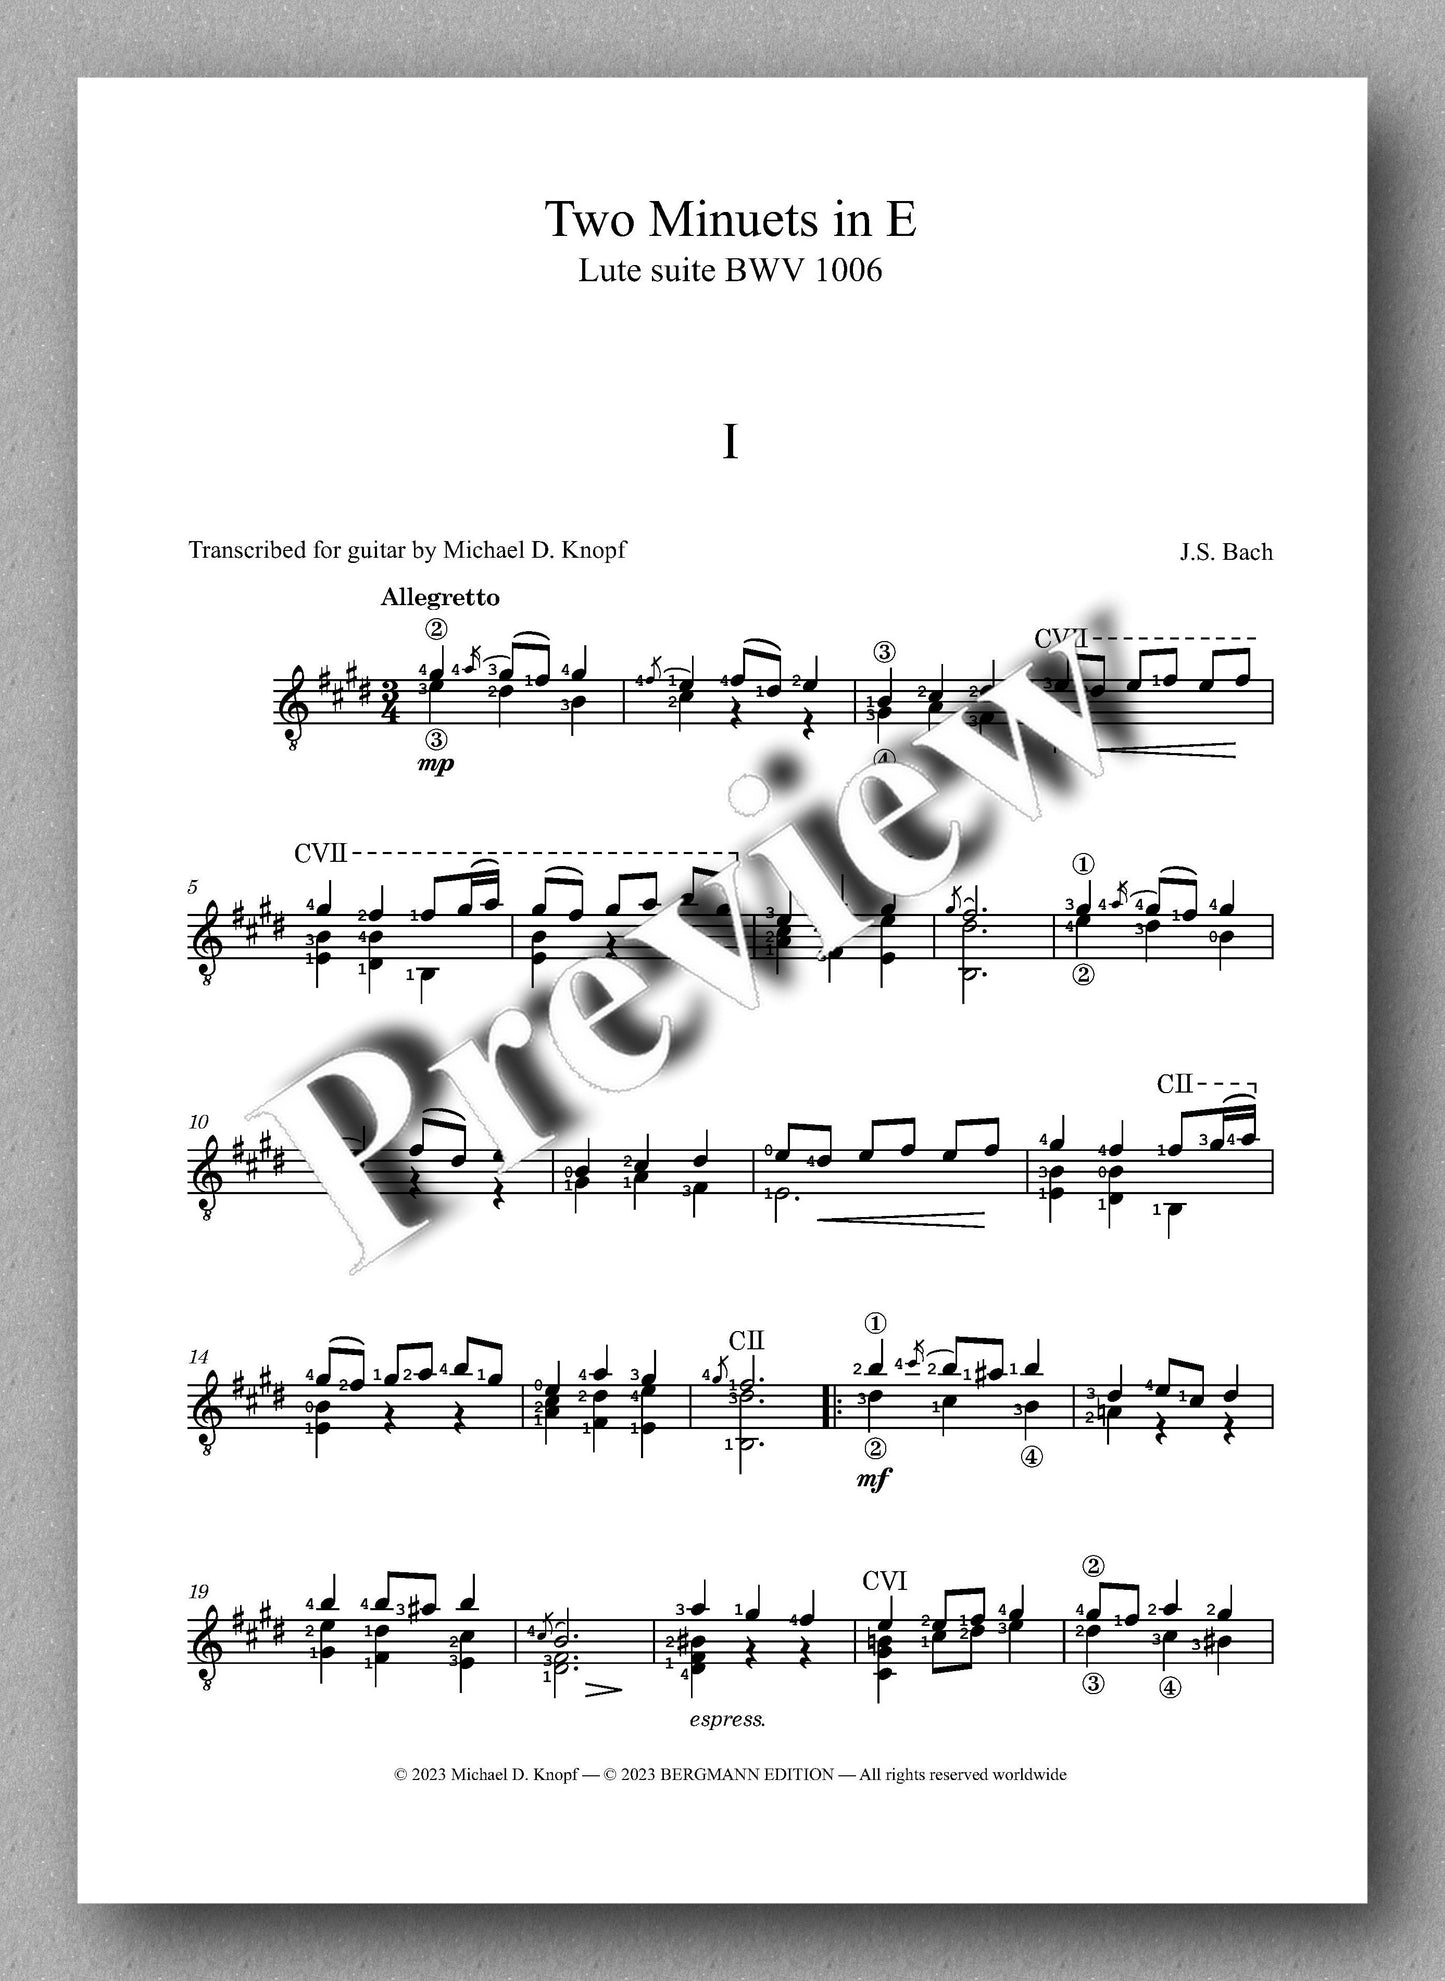 J.S.Bach, Two Minuets in E, BWV 1006 - preview of the music score 1